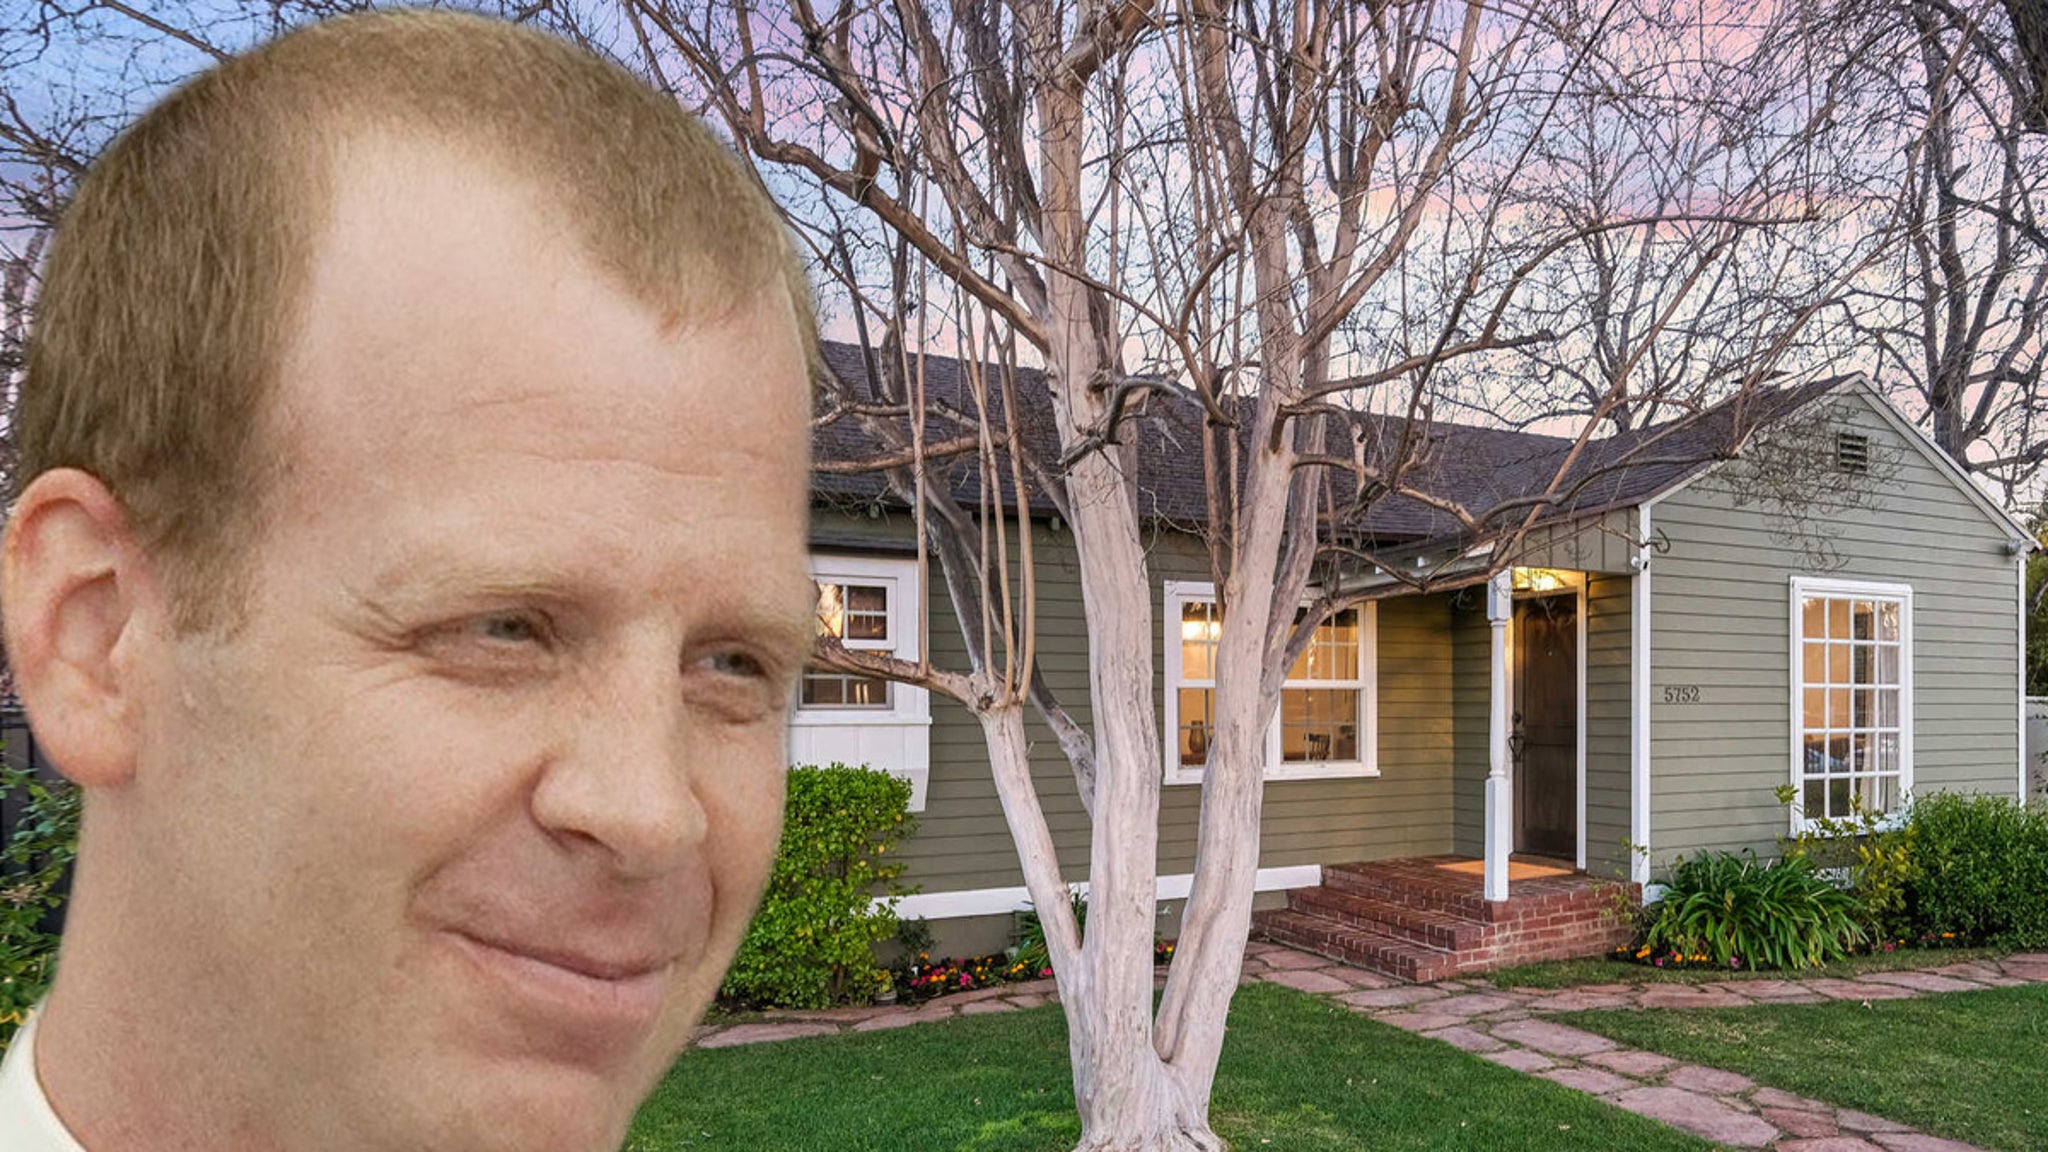 Toby's House from 'The Office' For Sale at Over a Million Dollars